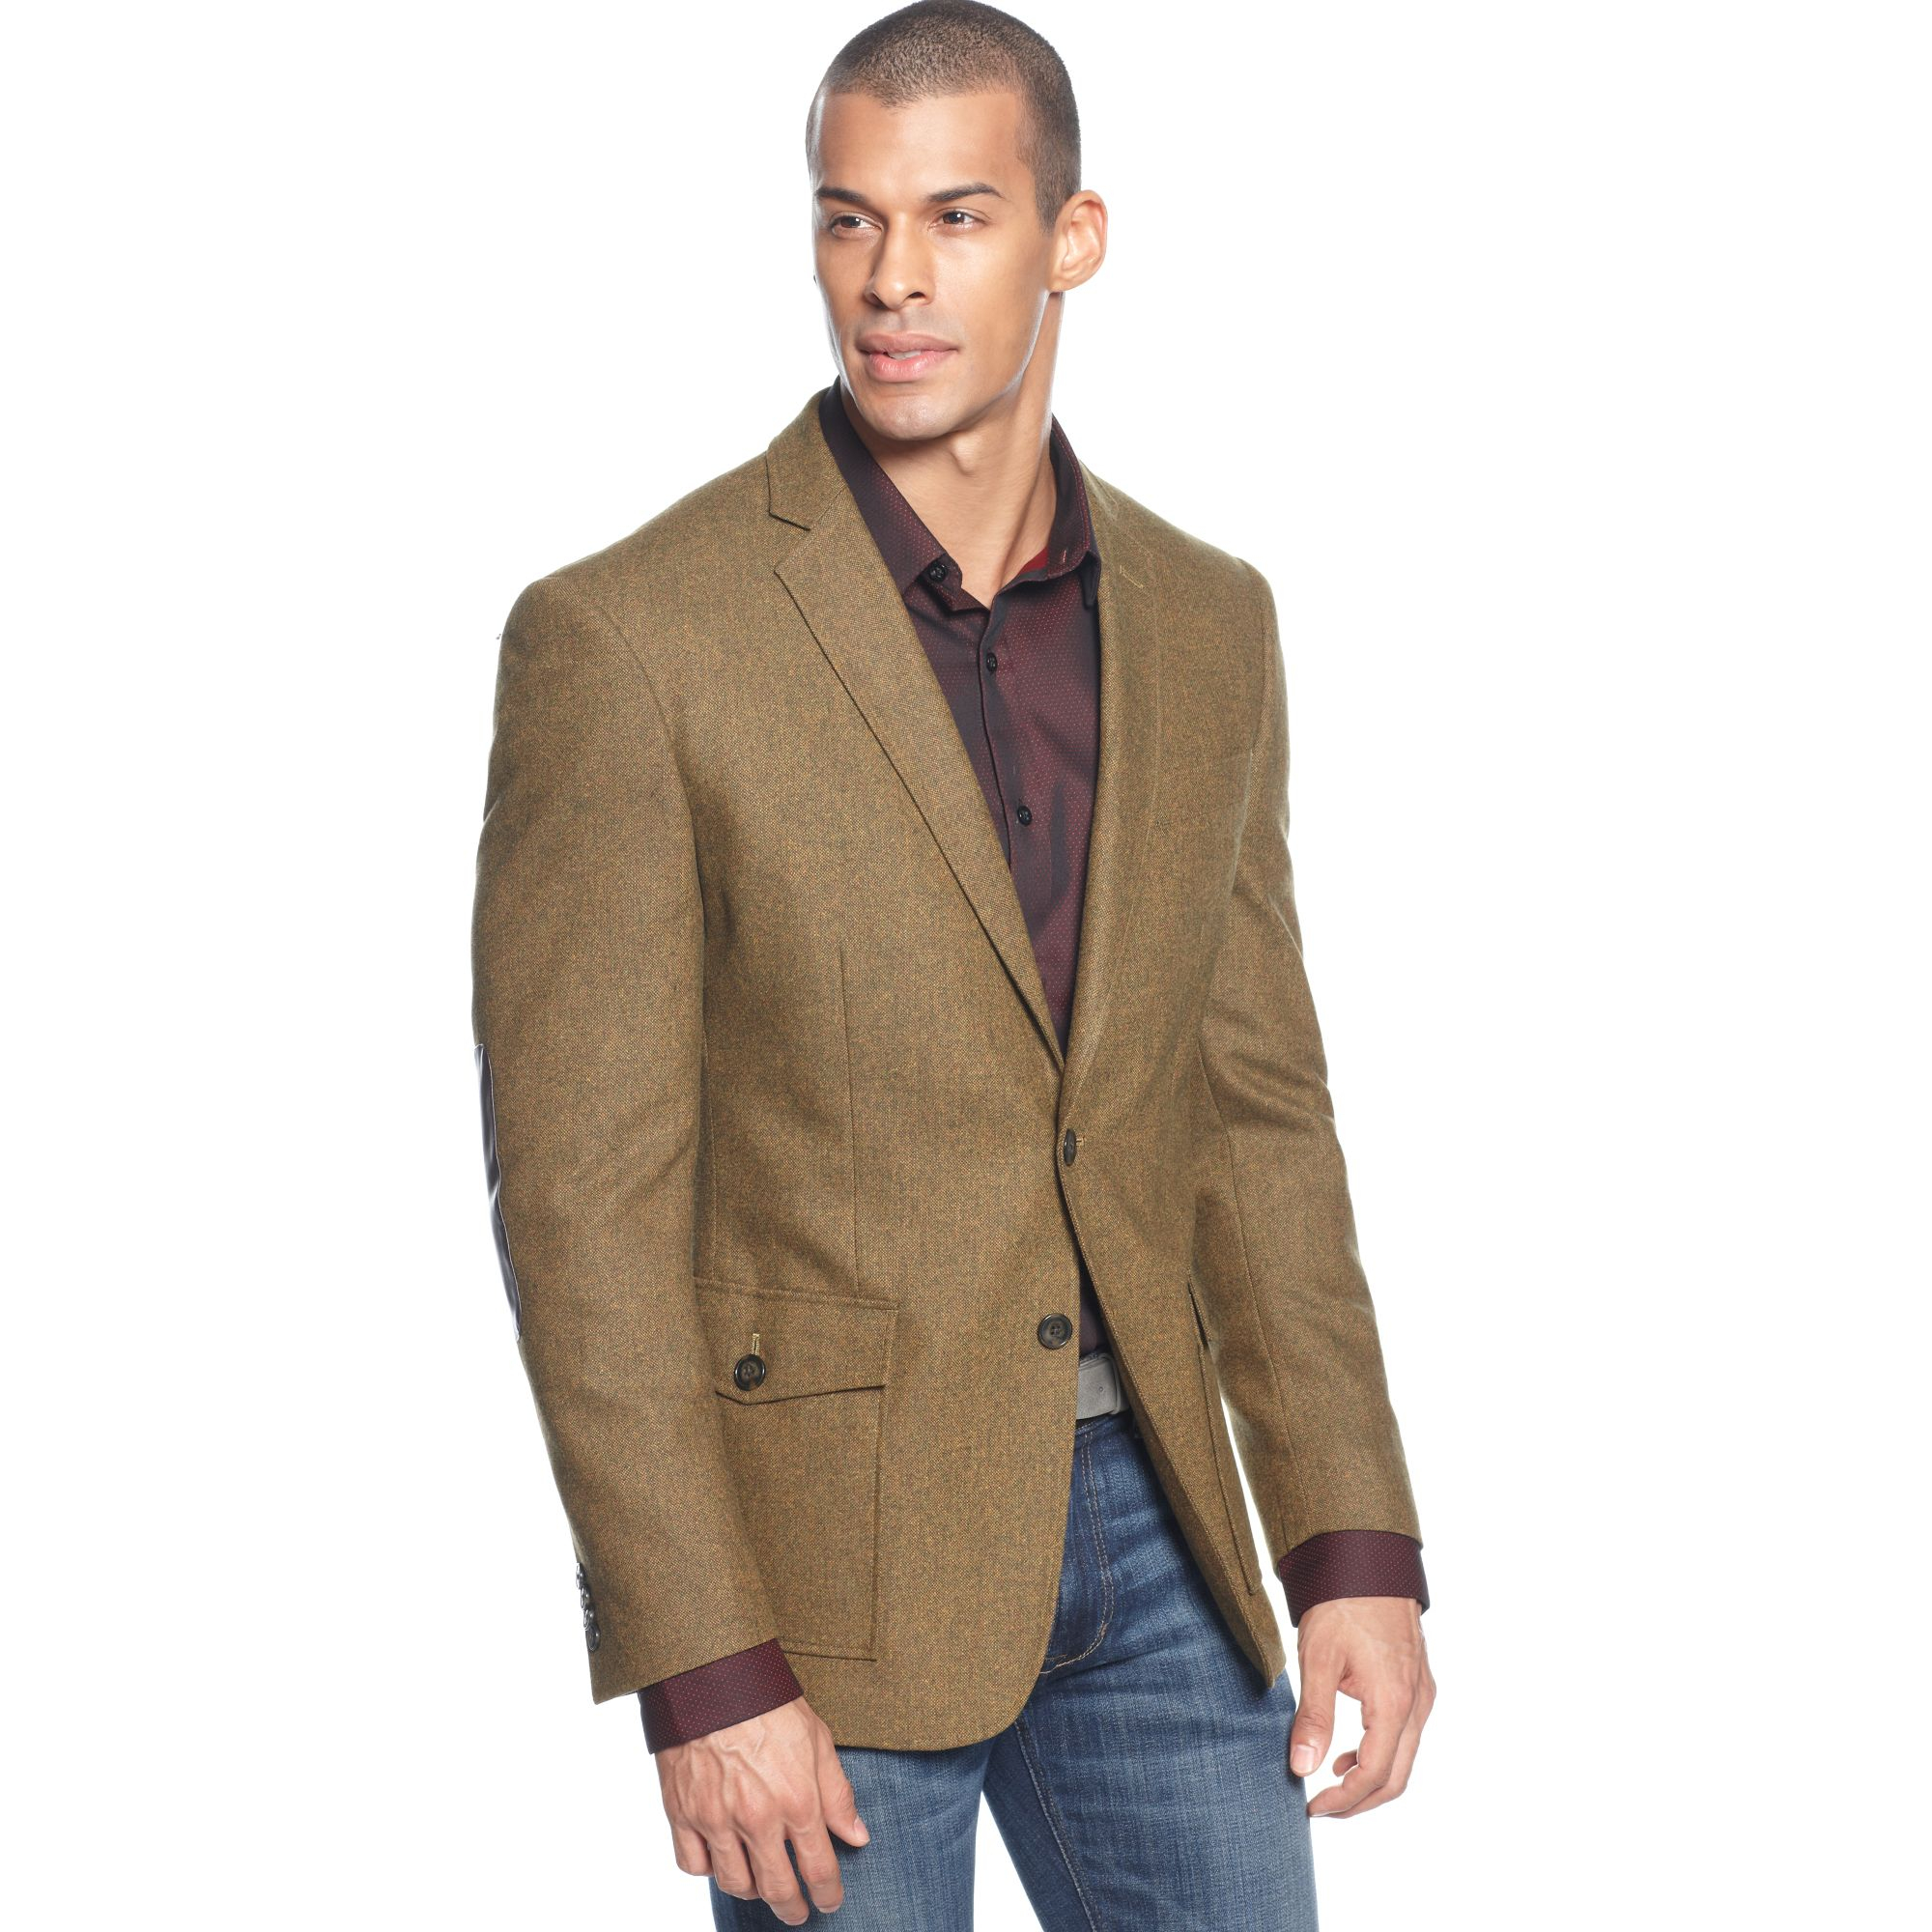 Sean John Tweed Blazer with Elbow Patches in Beige for Men (Olive) | Lyst